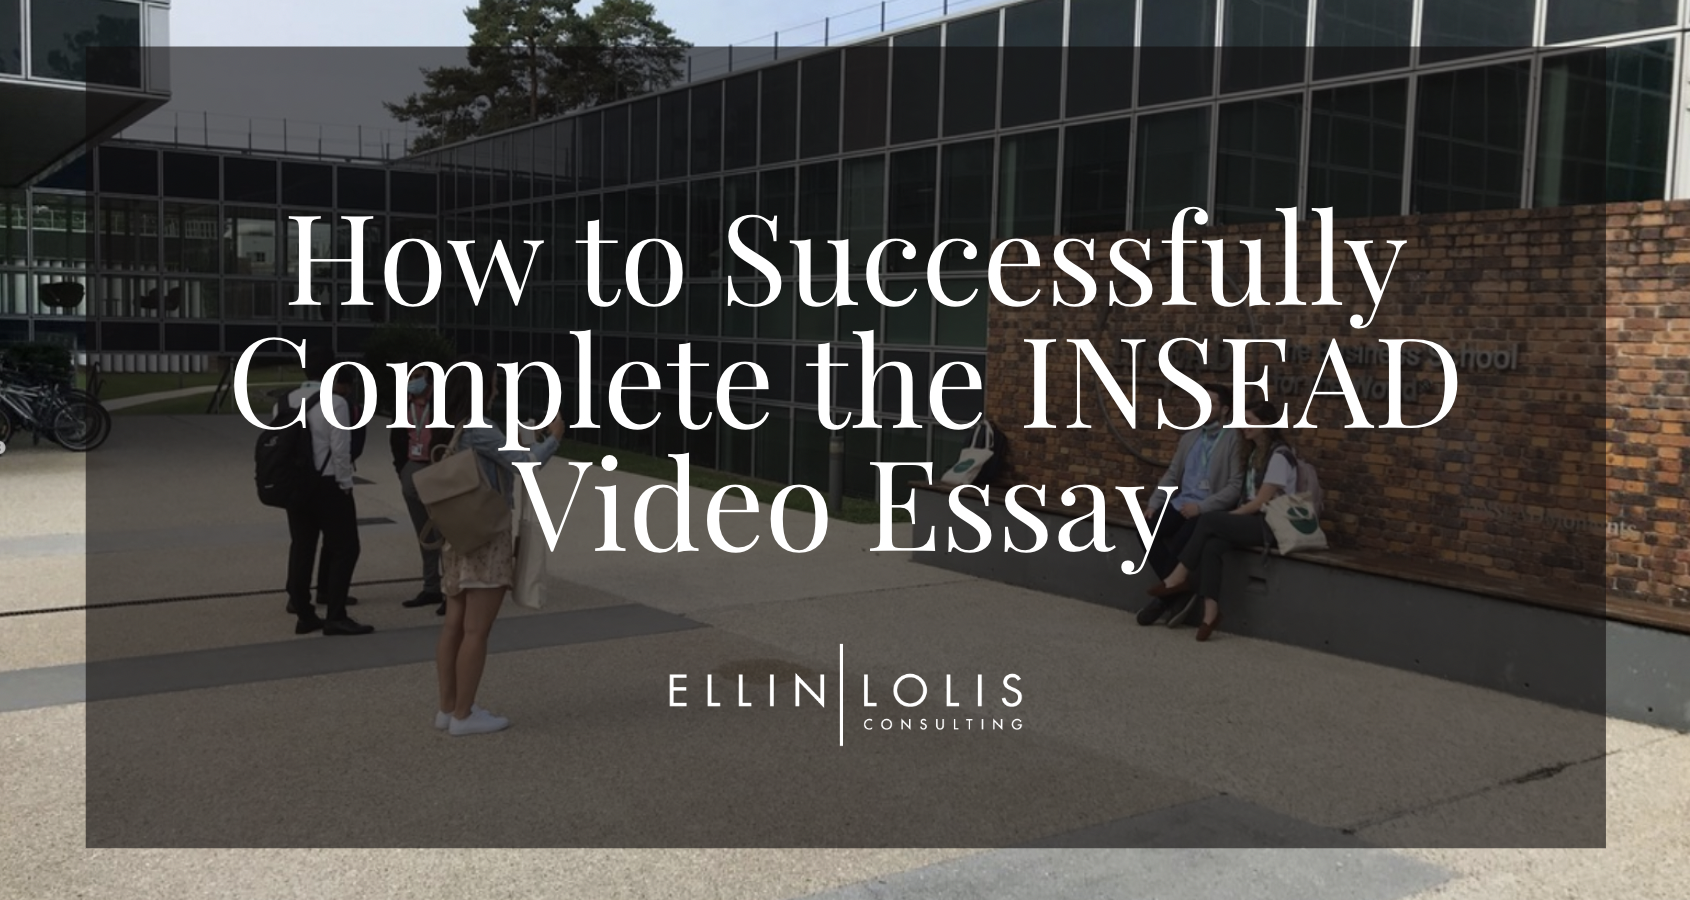 How to Successfully Complete the INSEAD Video Essay